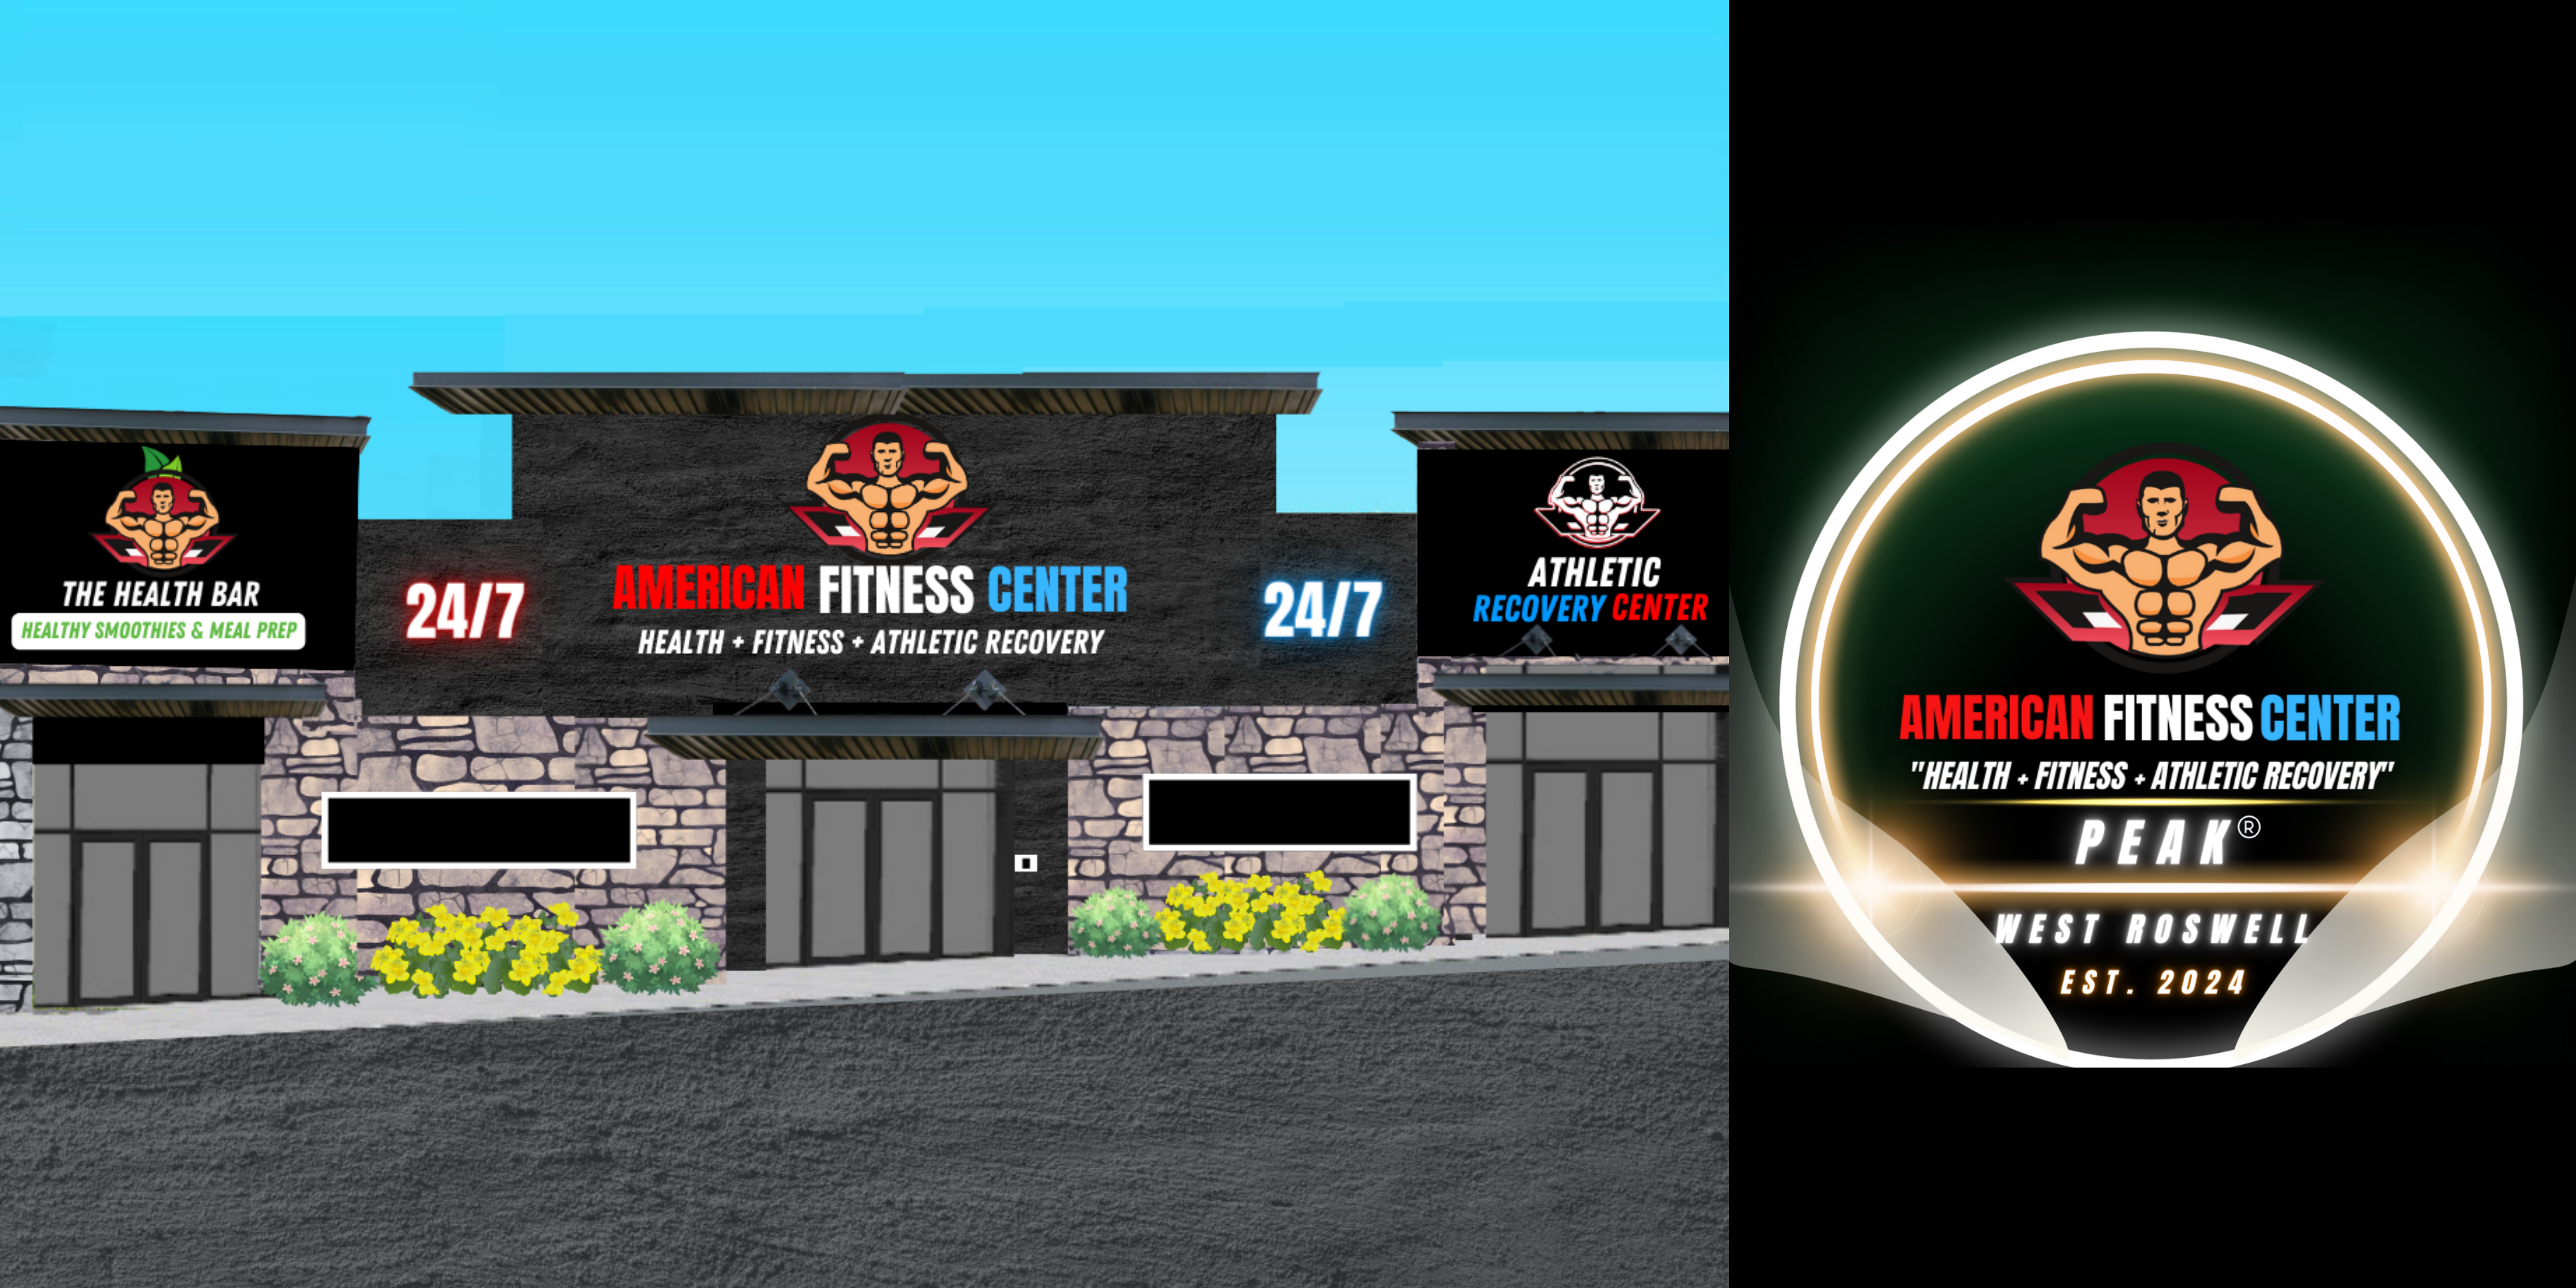 American Fitness Center West Roswell, GA - High-End 24 Hour Health Club Coming Soon